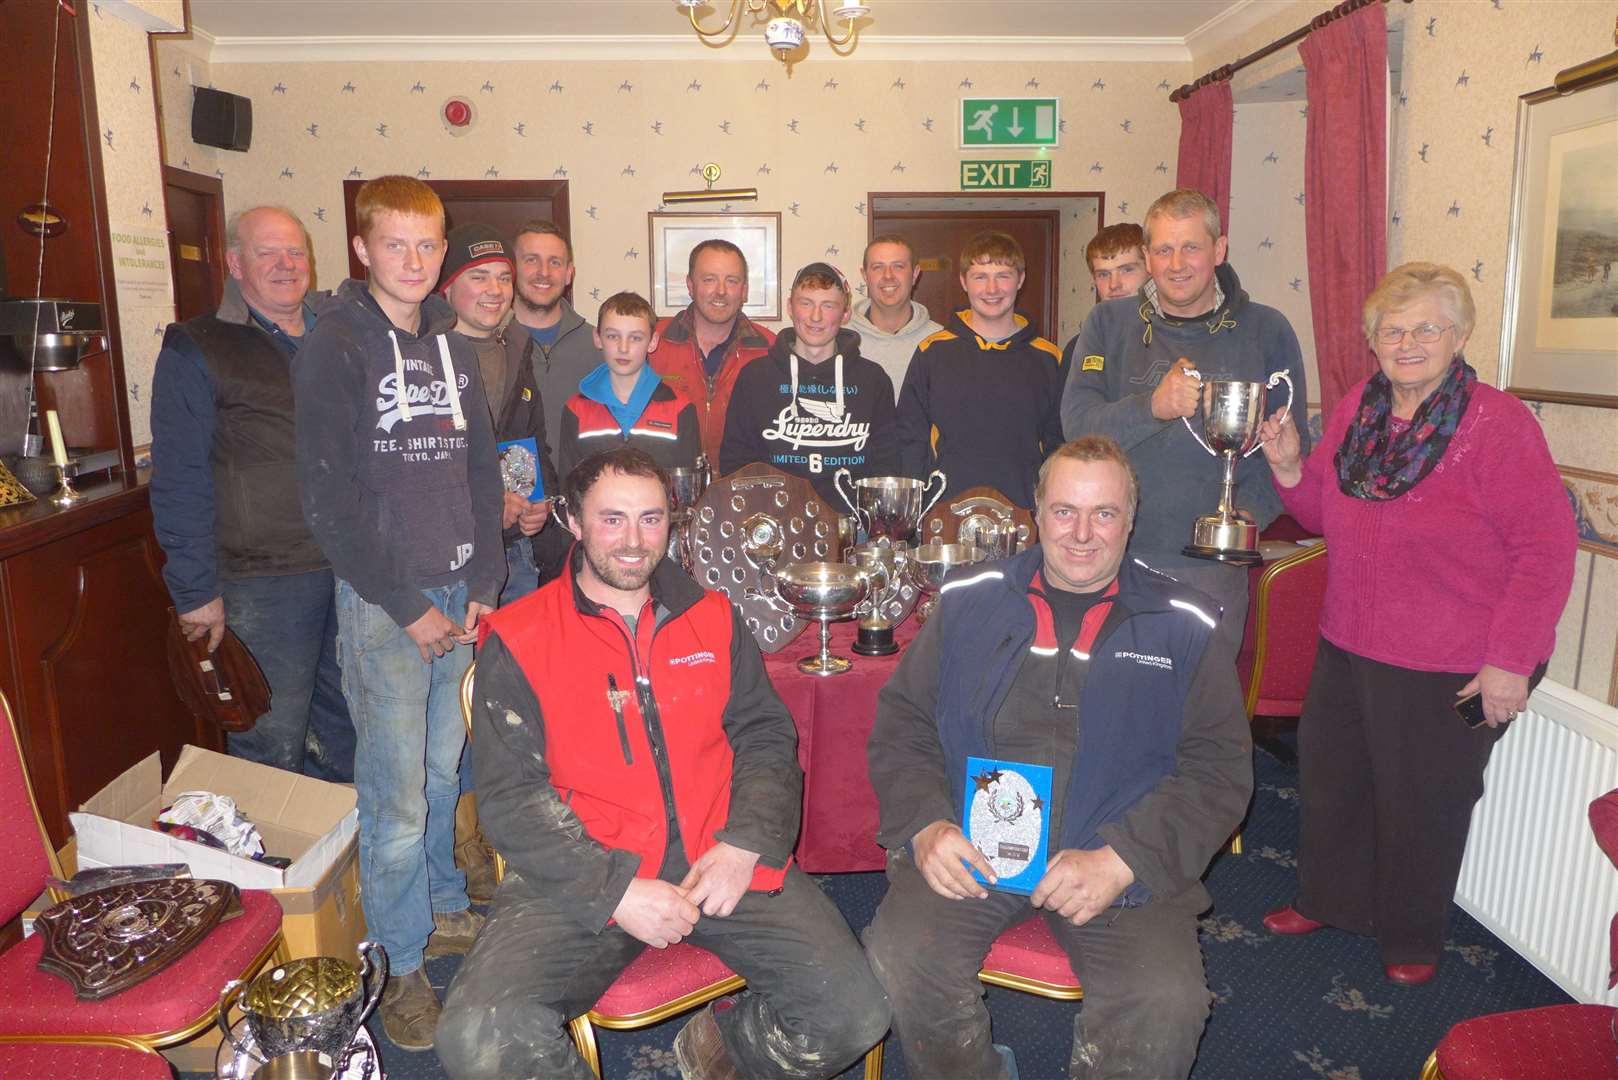 Joanna Mackay, West Greenland, who presented all the trophies, hands over the overall champion's cup to her son, Michael, in the Brown Trout Hotel, Watten, as some of the class winners look on.